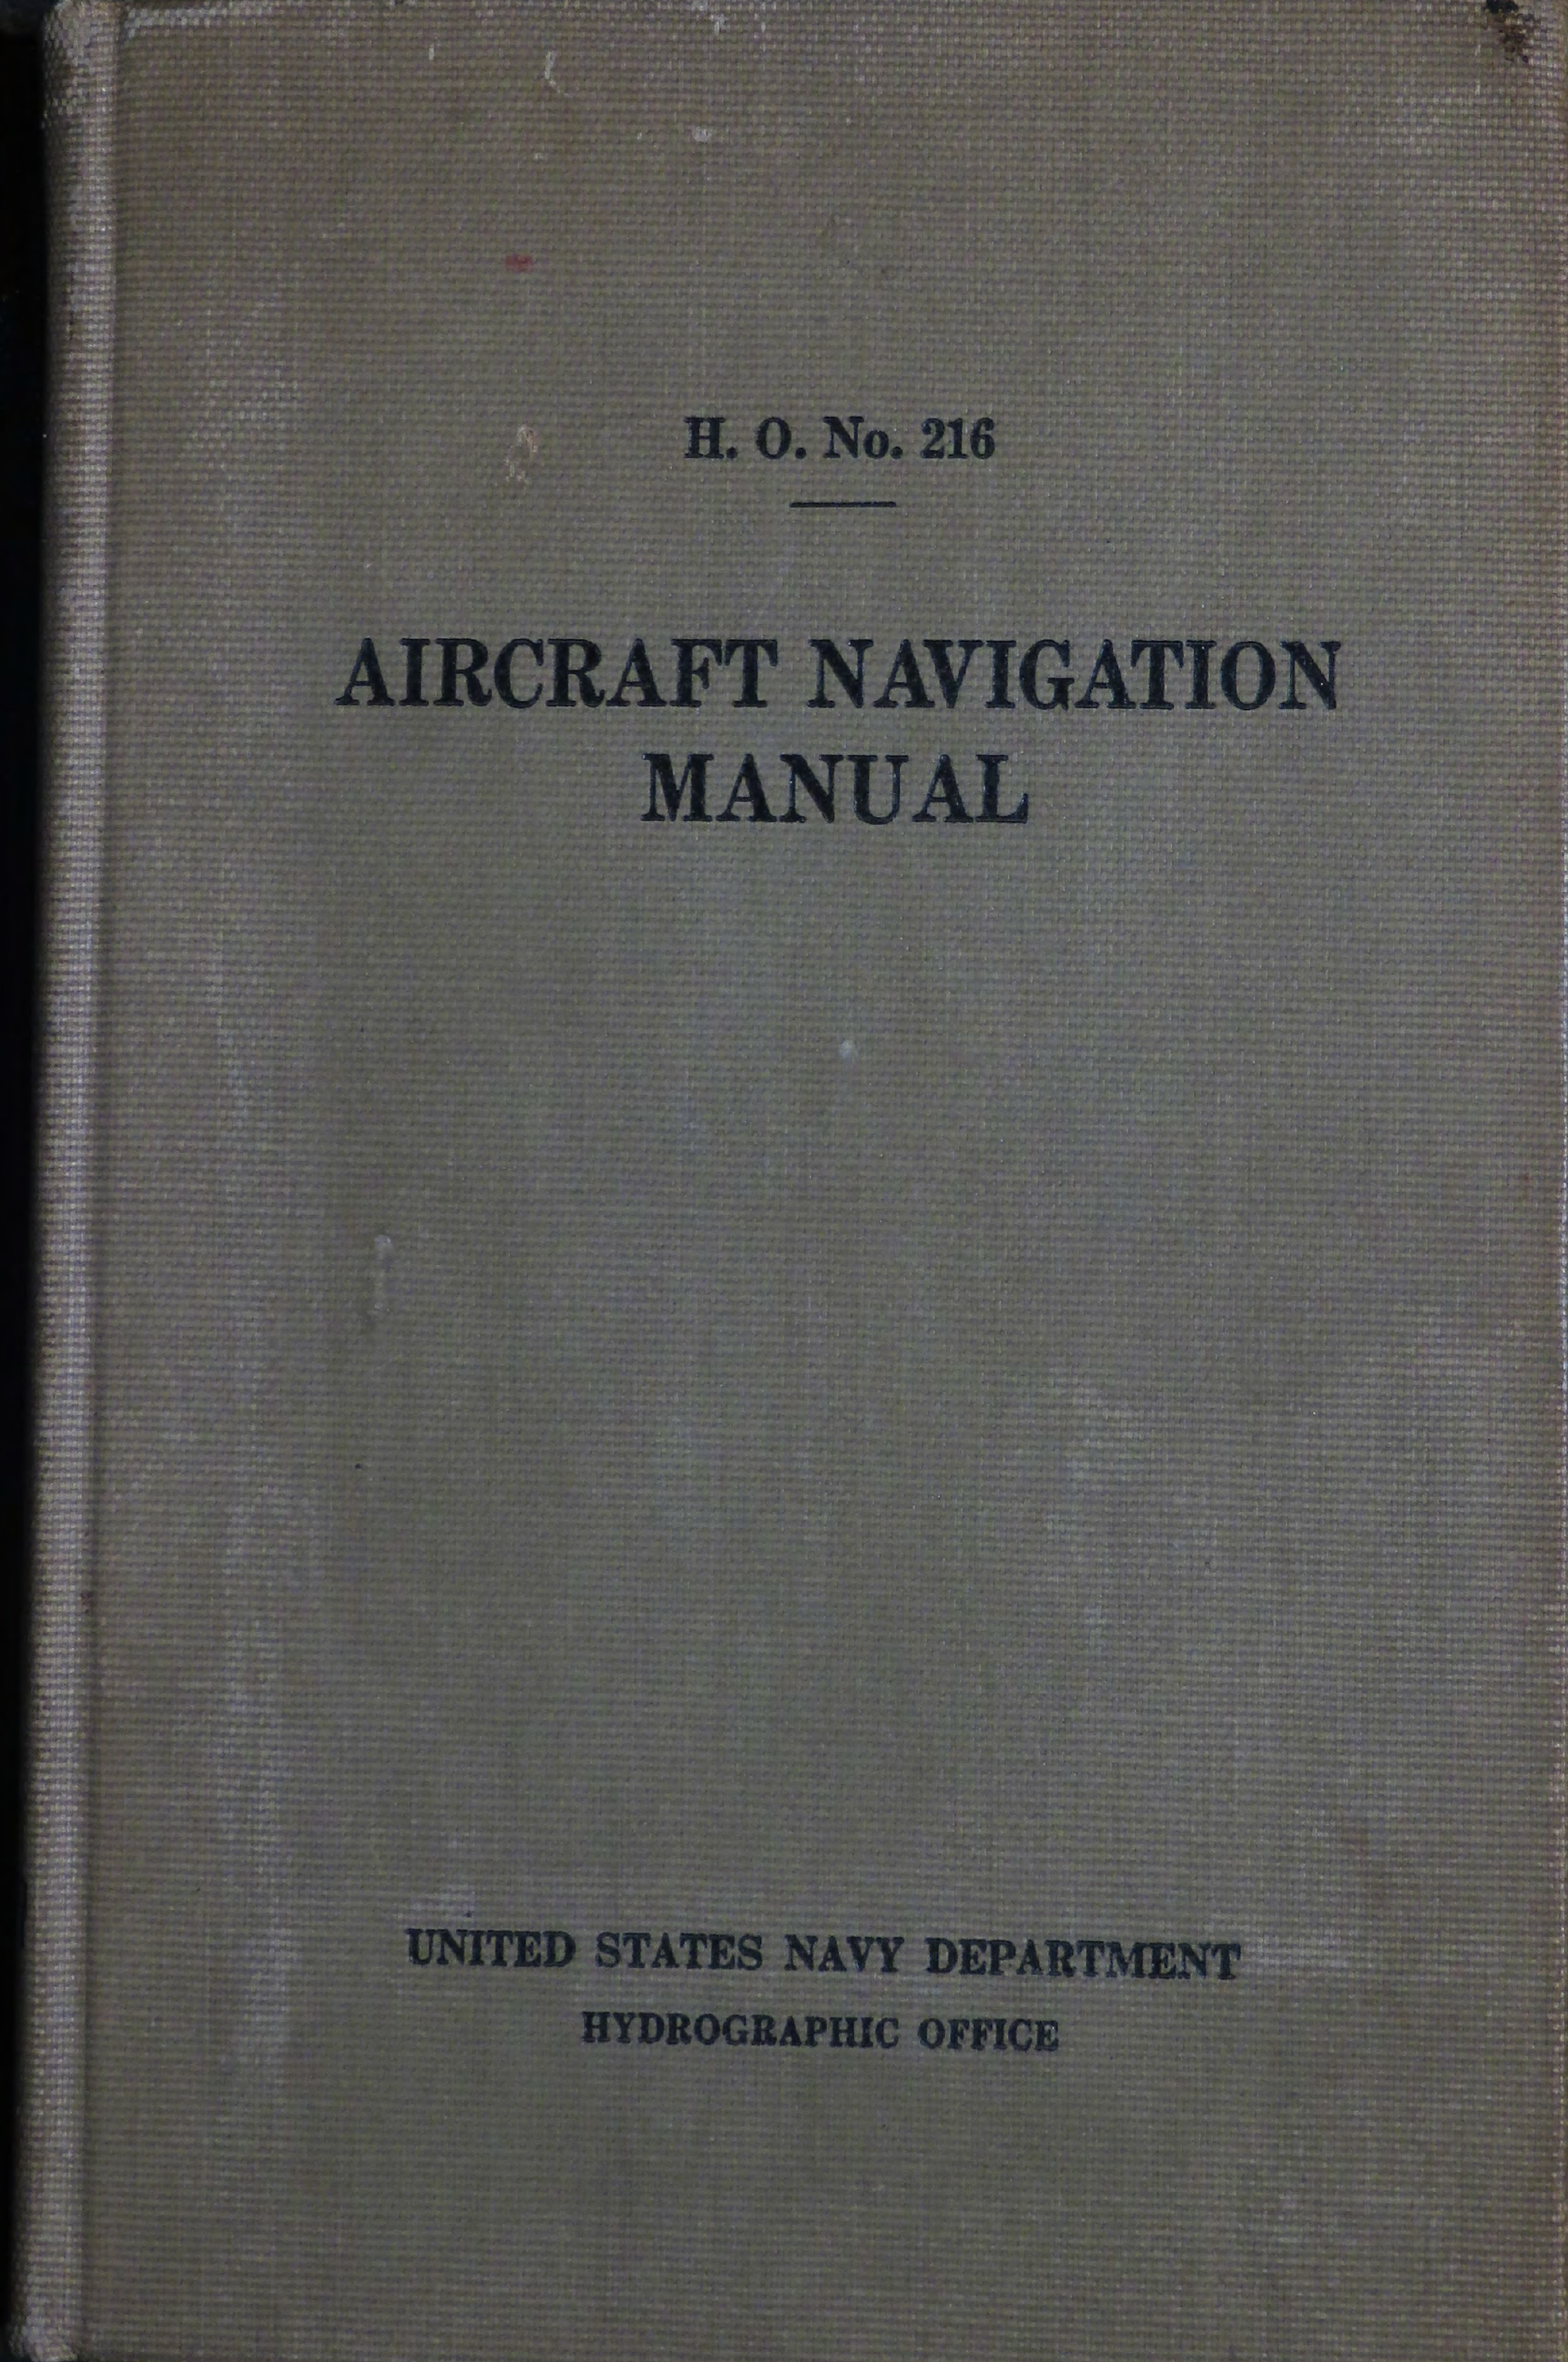 Sample page 1 from AirCorps Library document: Aircraft Navigation Manual